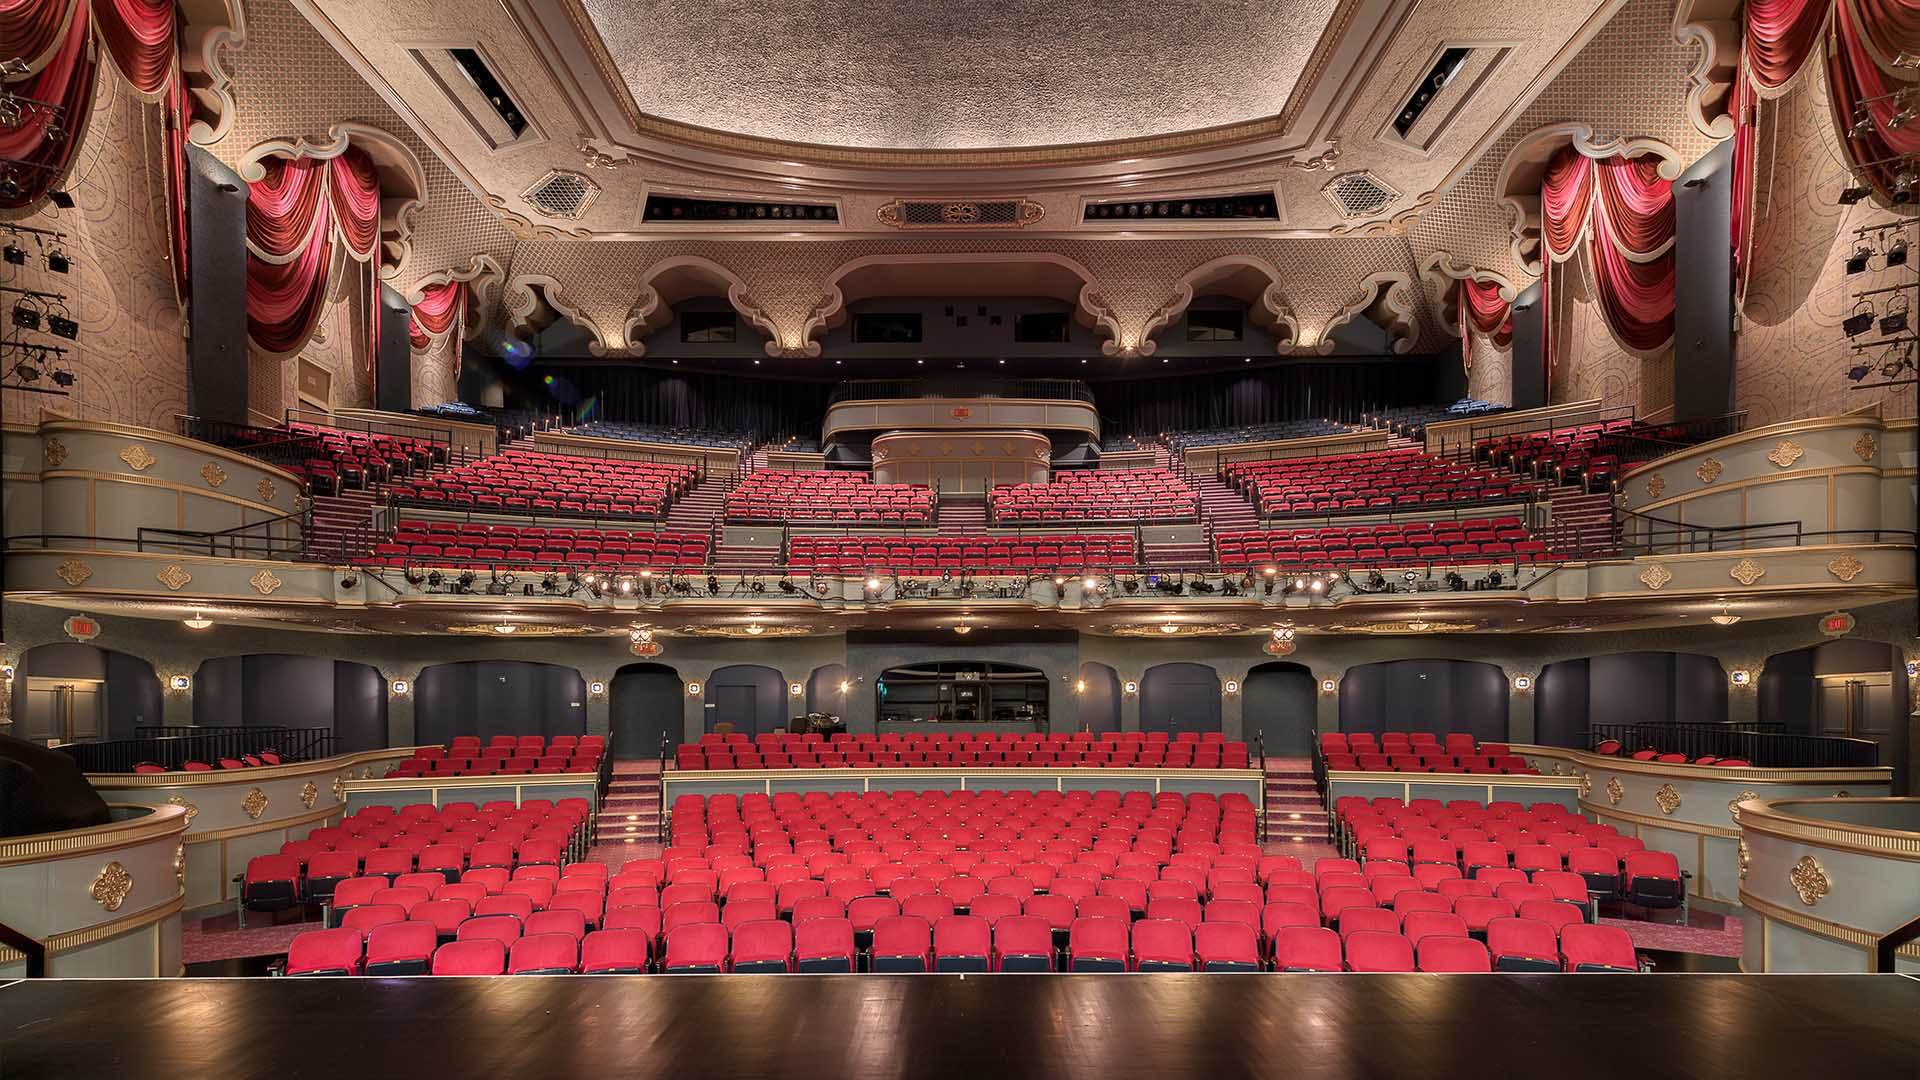 A view from Capitol Theater stage looking out into empty seats of the main floor and balcony. The seats are bright red and the hall is surrounded by red curtains.